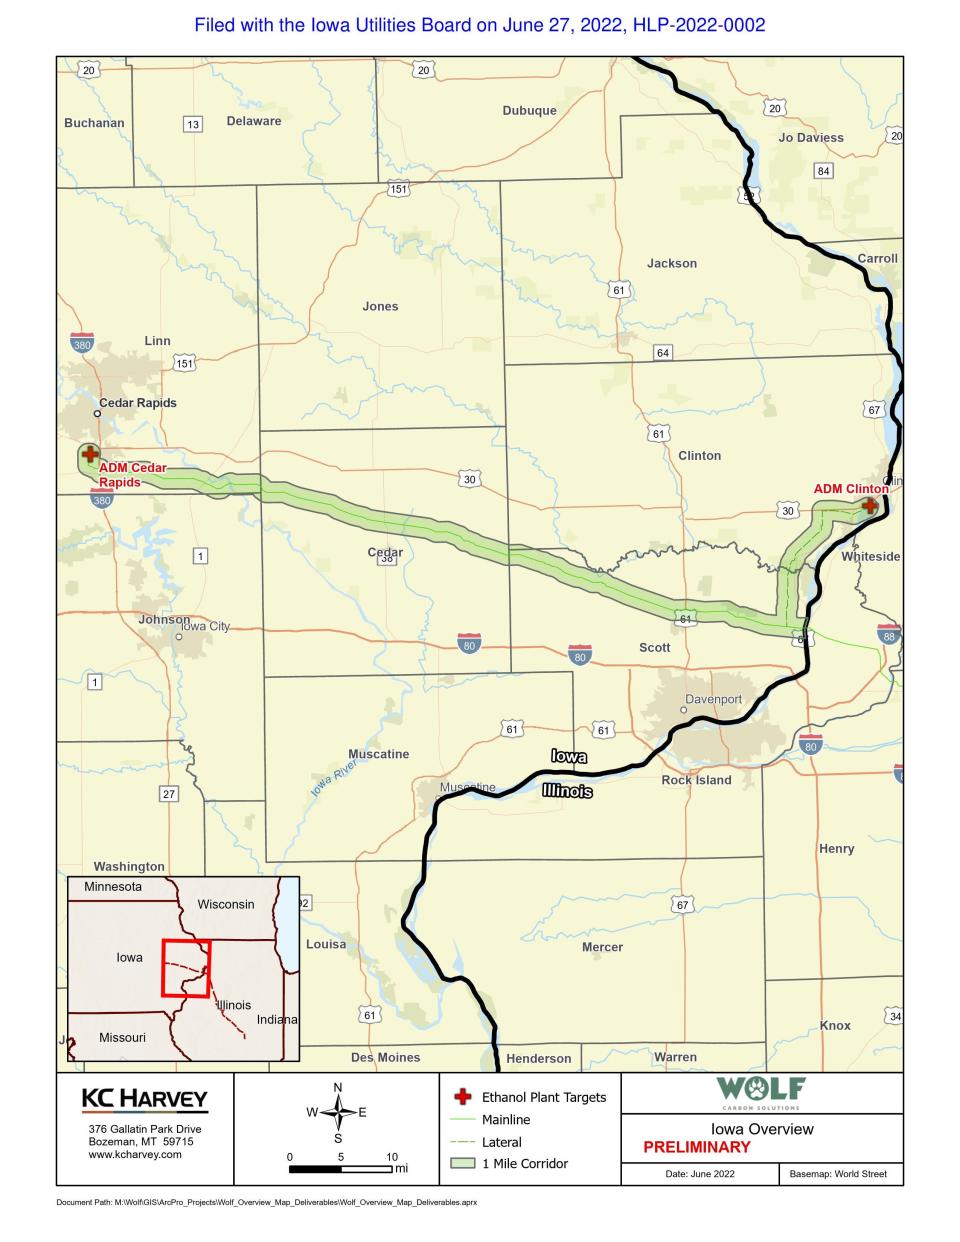 The proposed 350-mile carbon capture pipeline from Wolf Carbon Solutions US, LLC